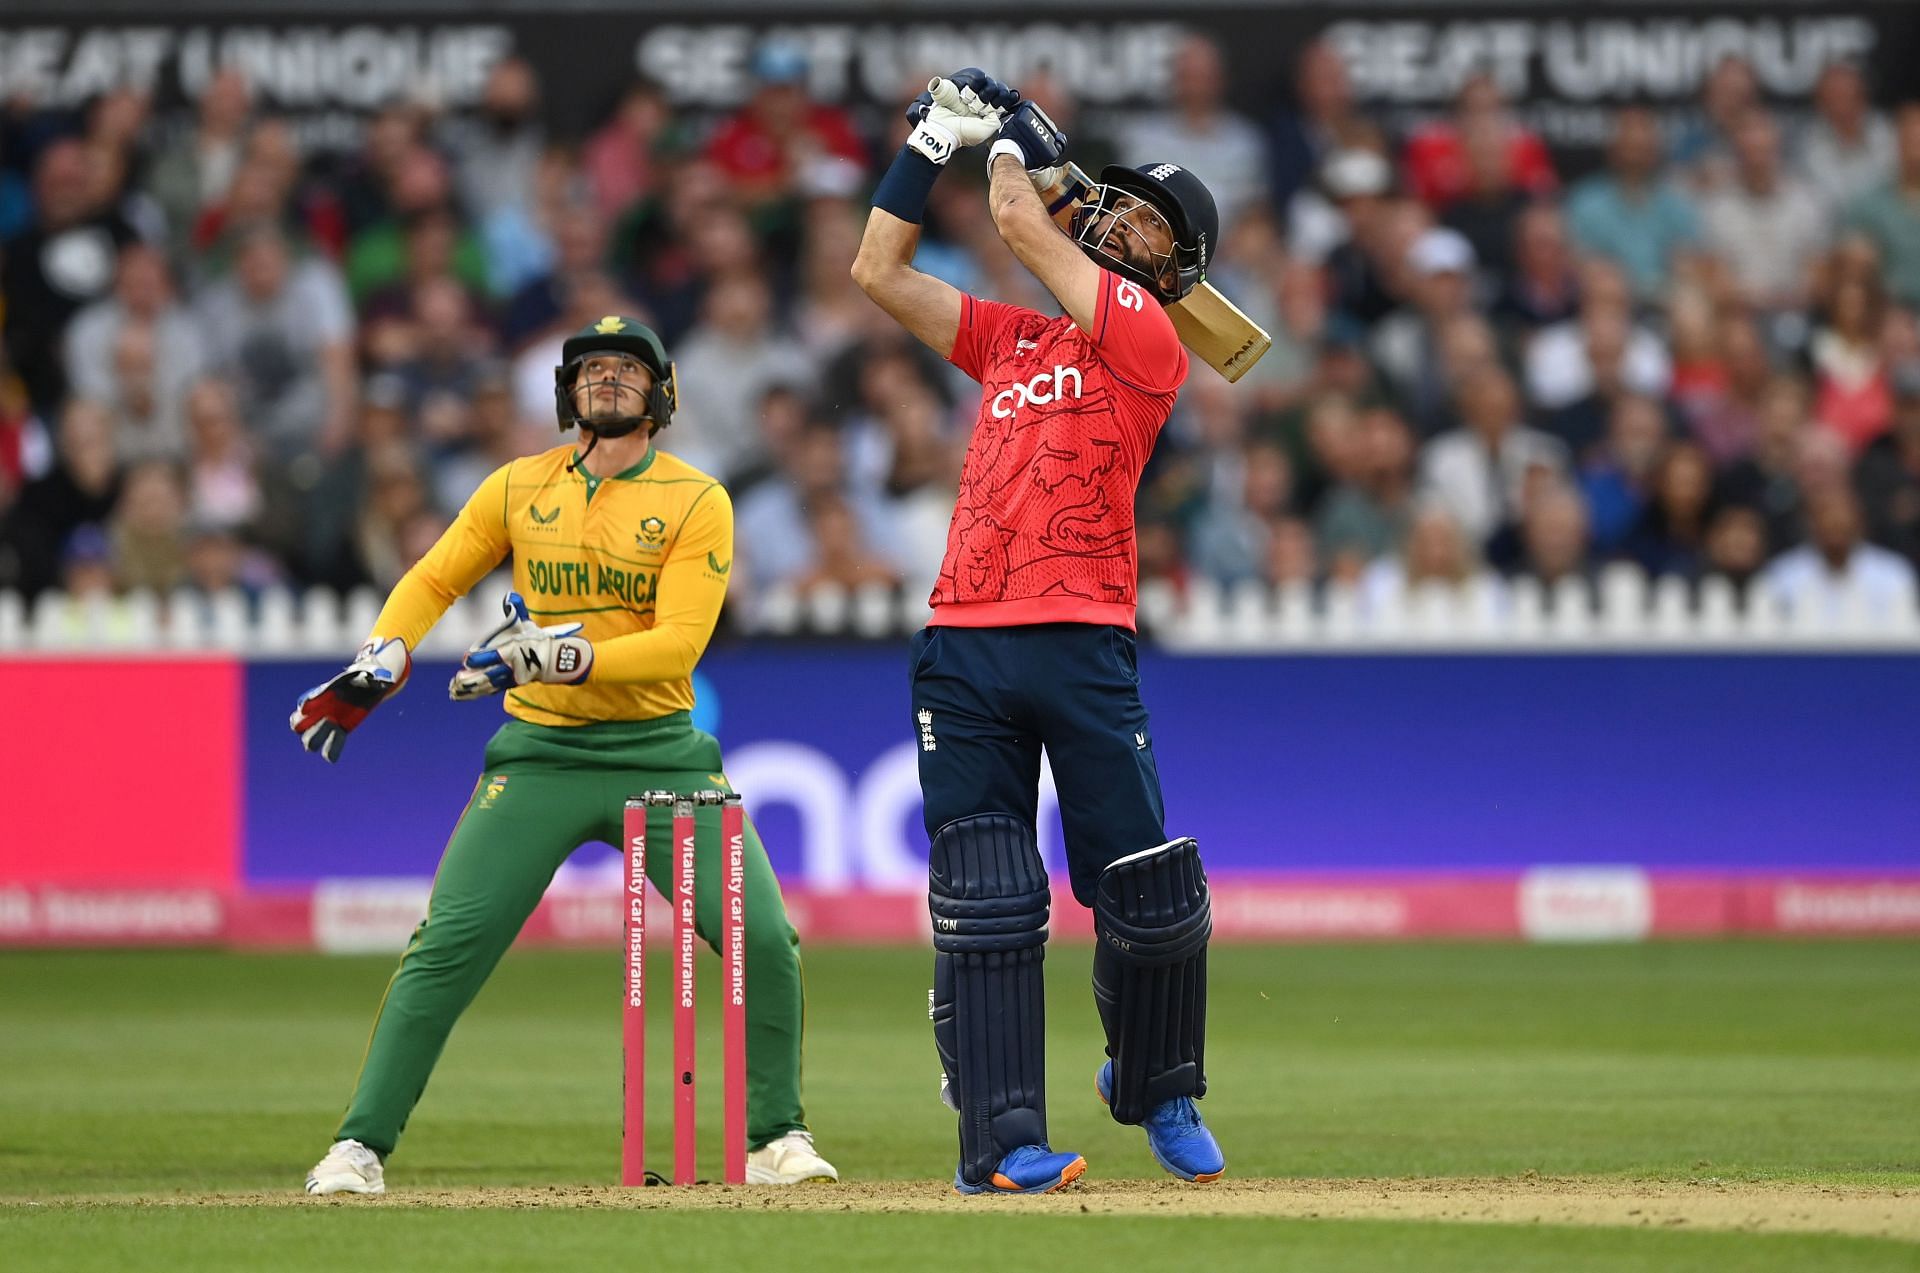 England v South Africa - 1st Vitality IT20 (Image Courtesy: Getty Images)